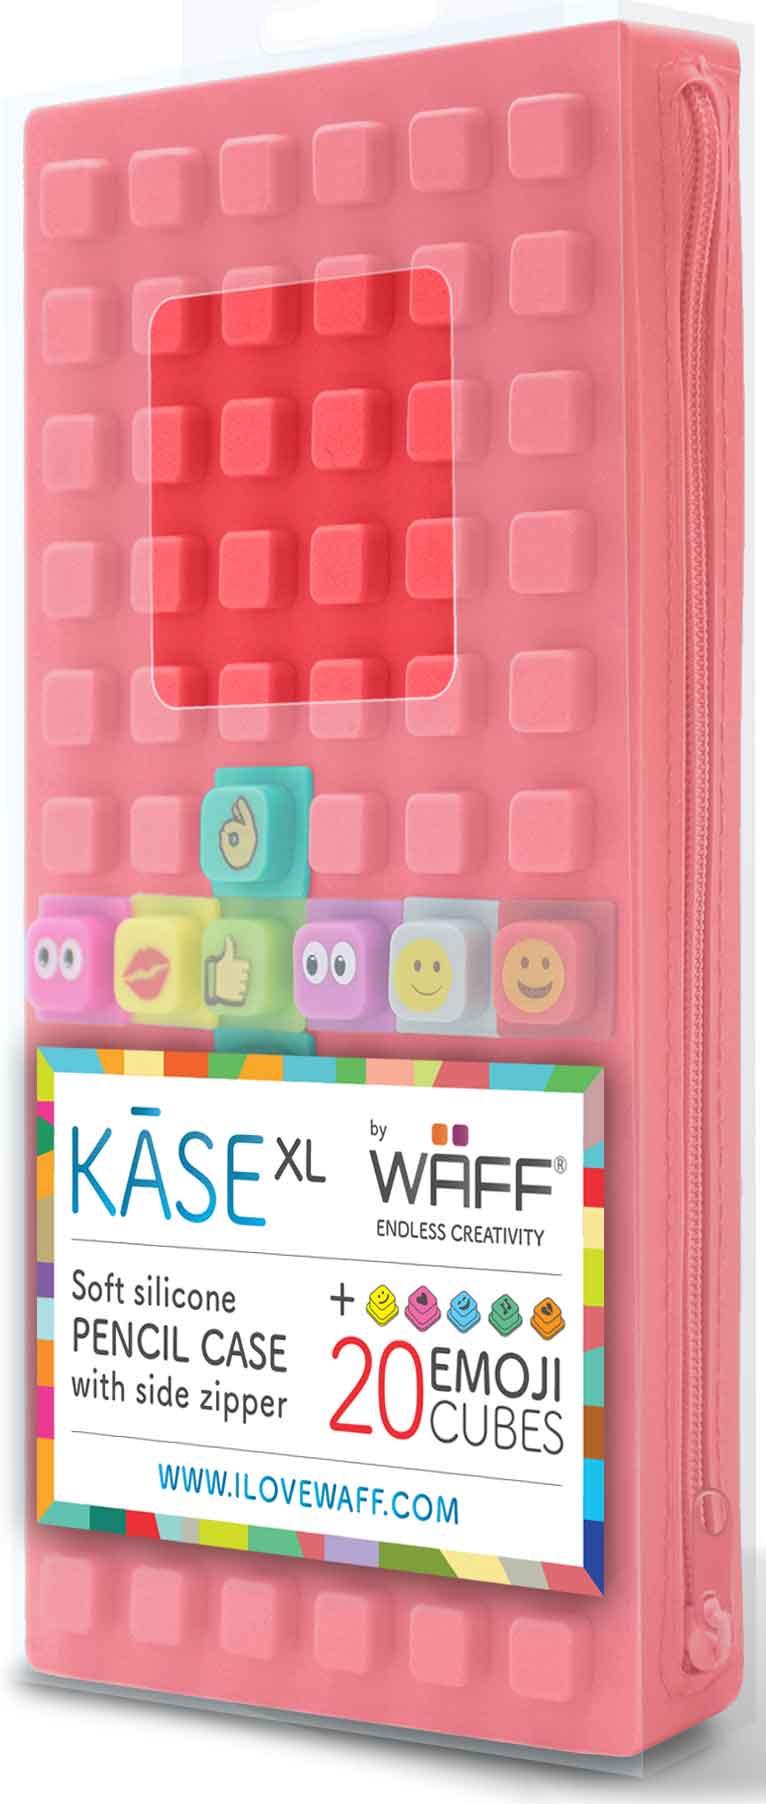 Waff Pencil Case (Red) in package